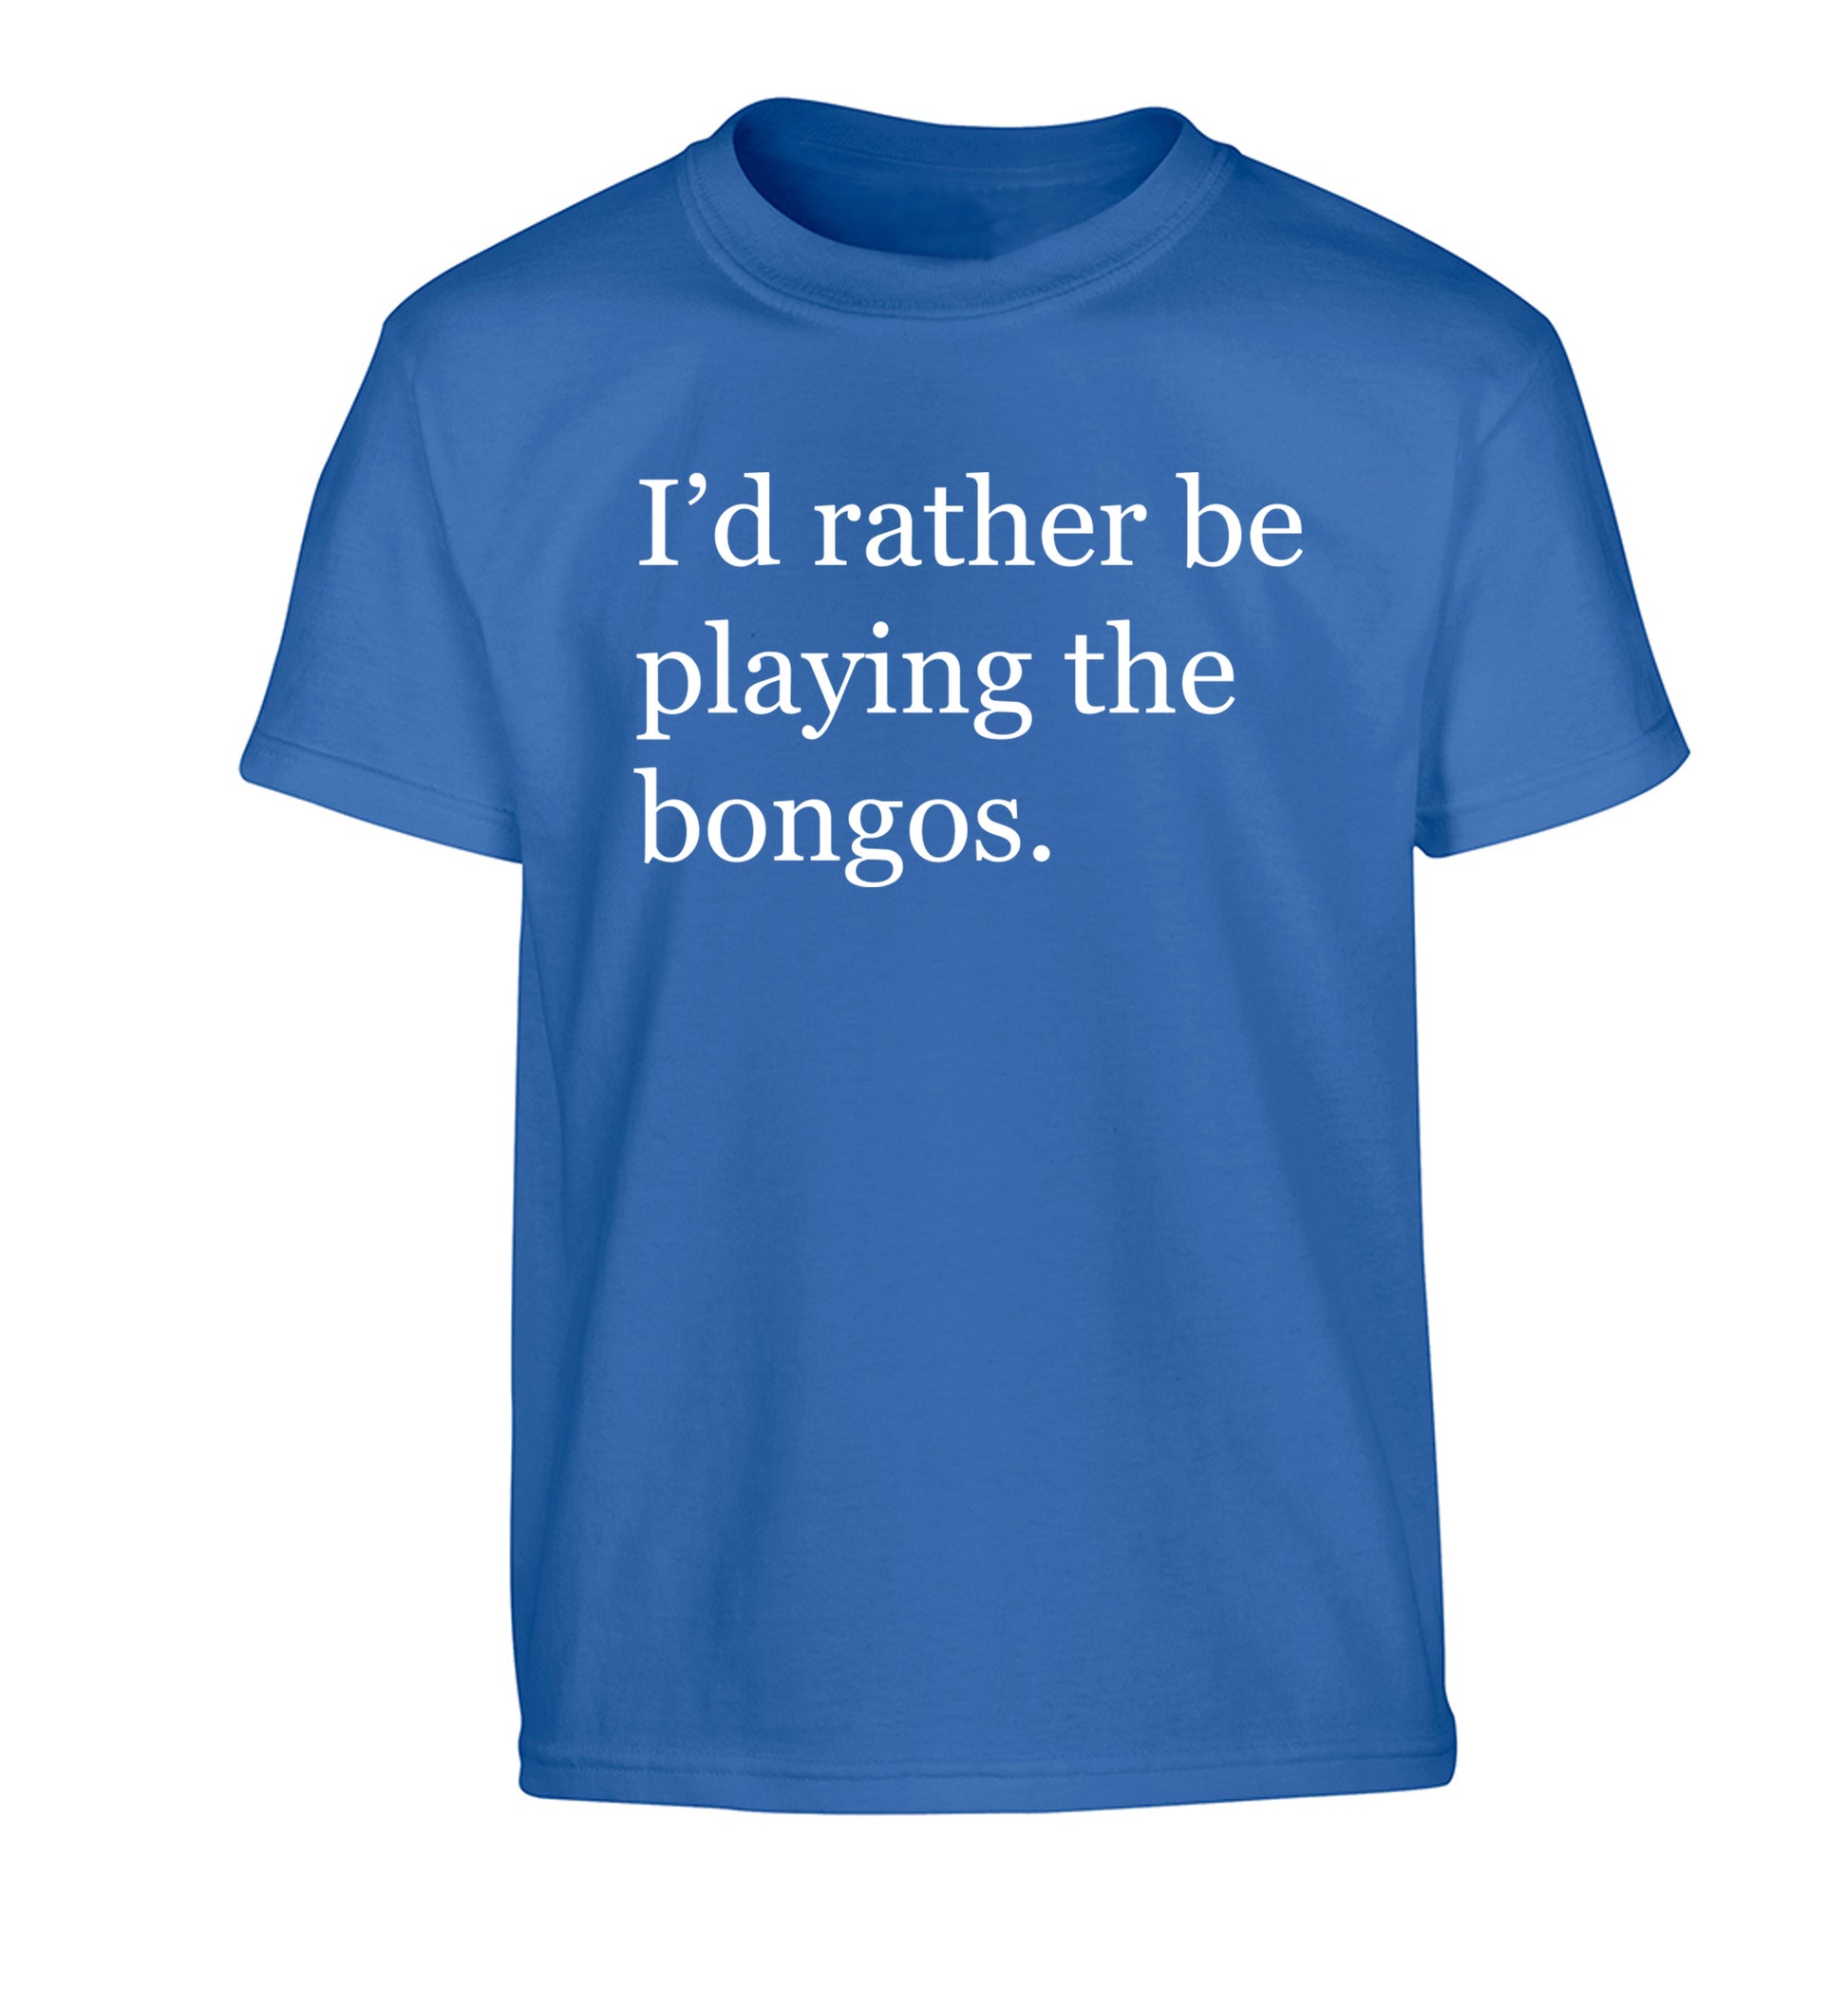 I'd rather be playing the bongos Children's blue Tshirt 12-14 Years